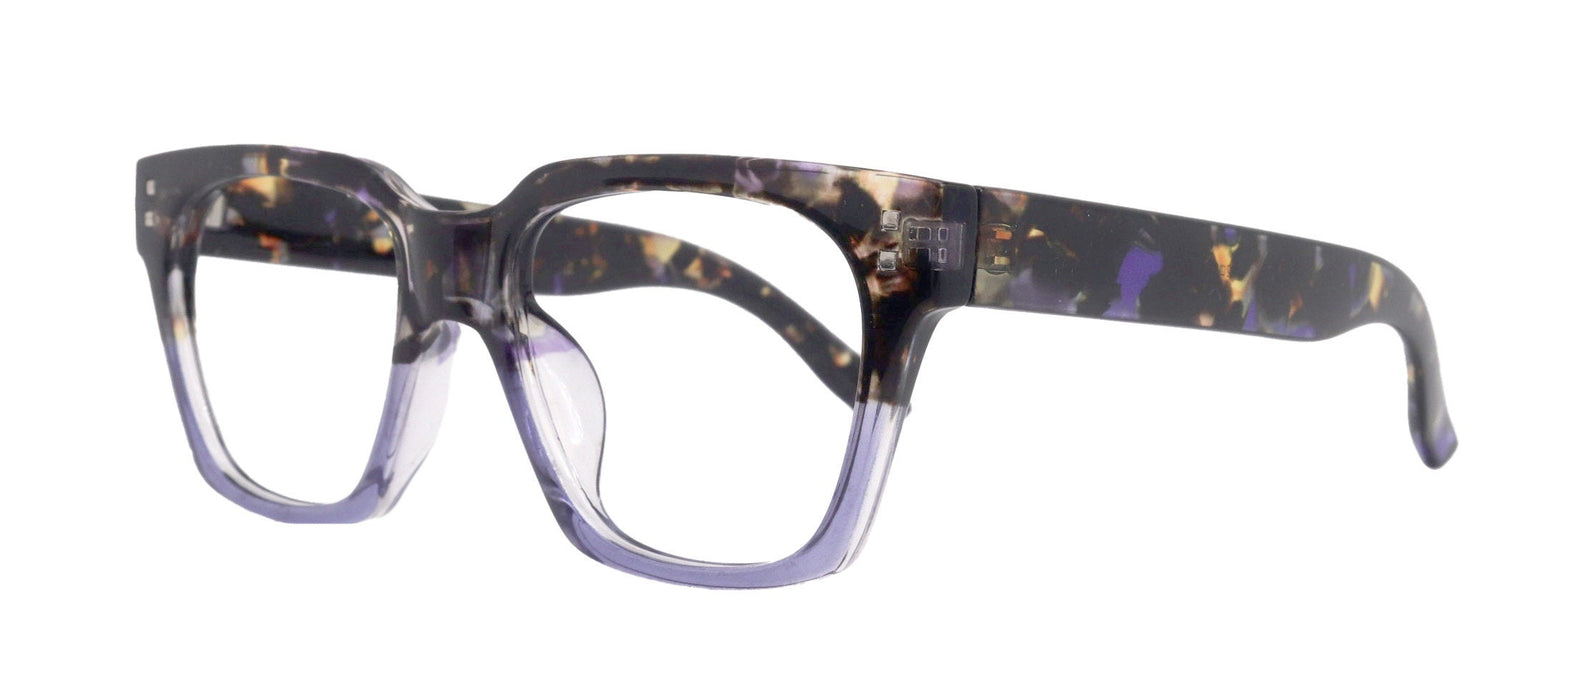 Bifocal Premium Reading Glasses, High End Readers +1.25 to +3.50 Magnifying, Fashion Square (Purple Black Tortoise) NY Fifth Avenue